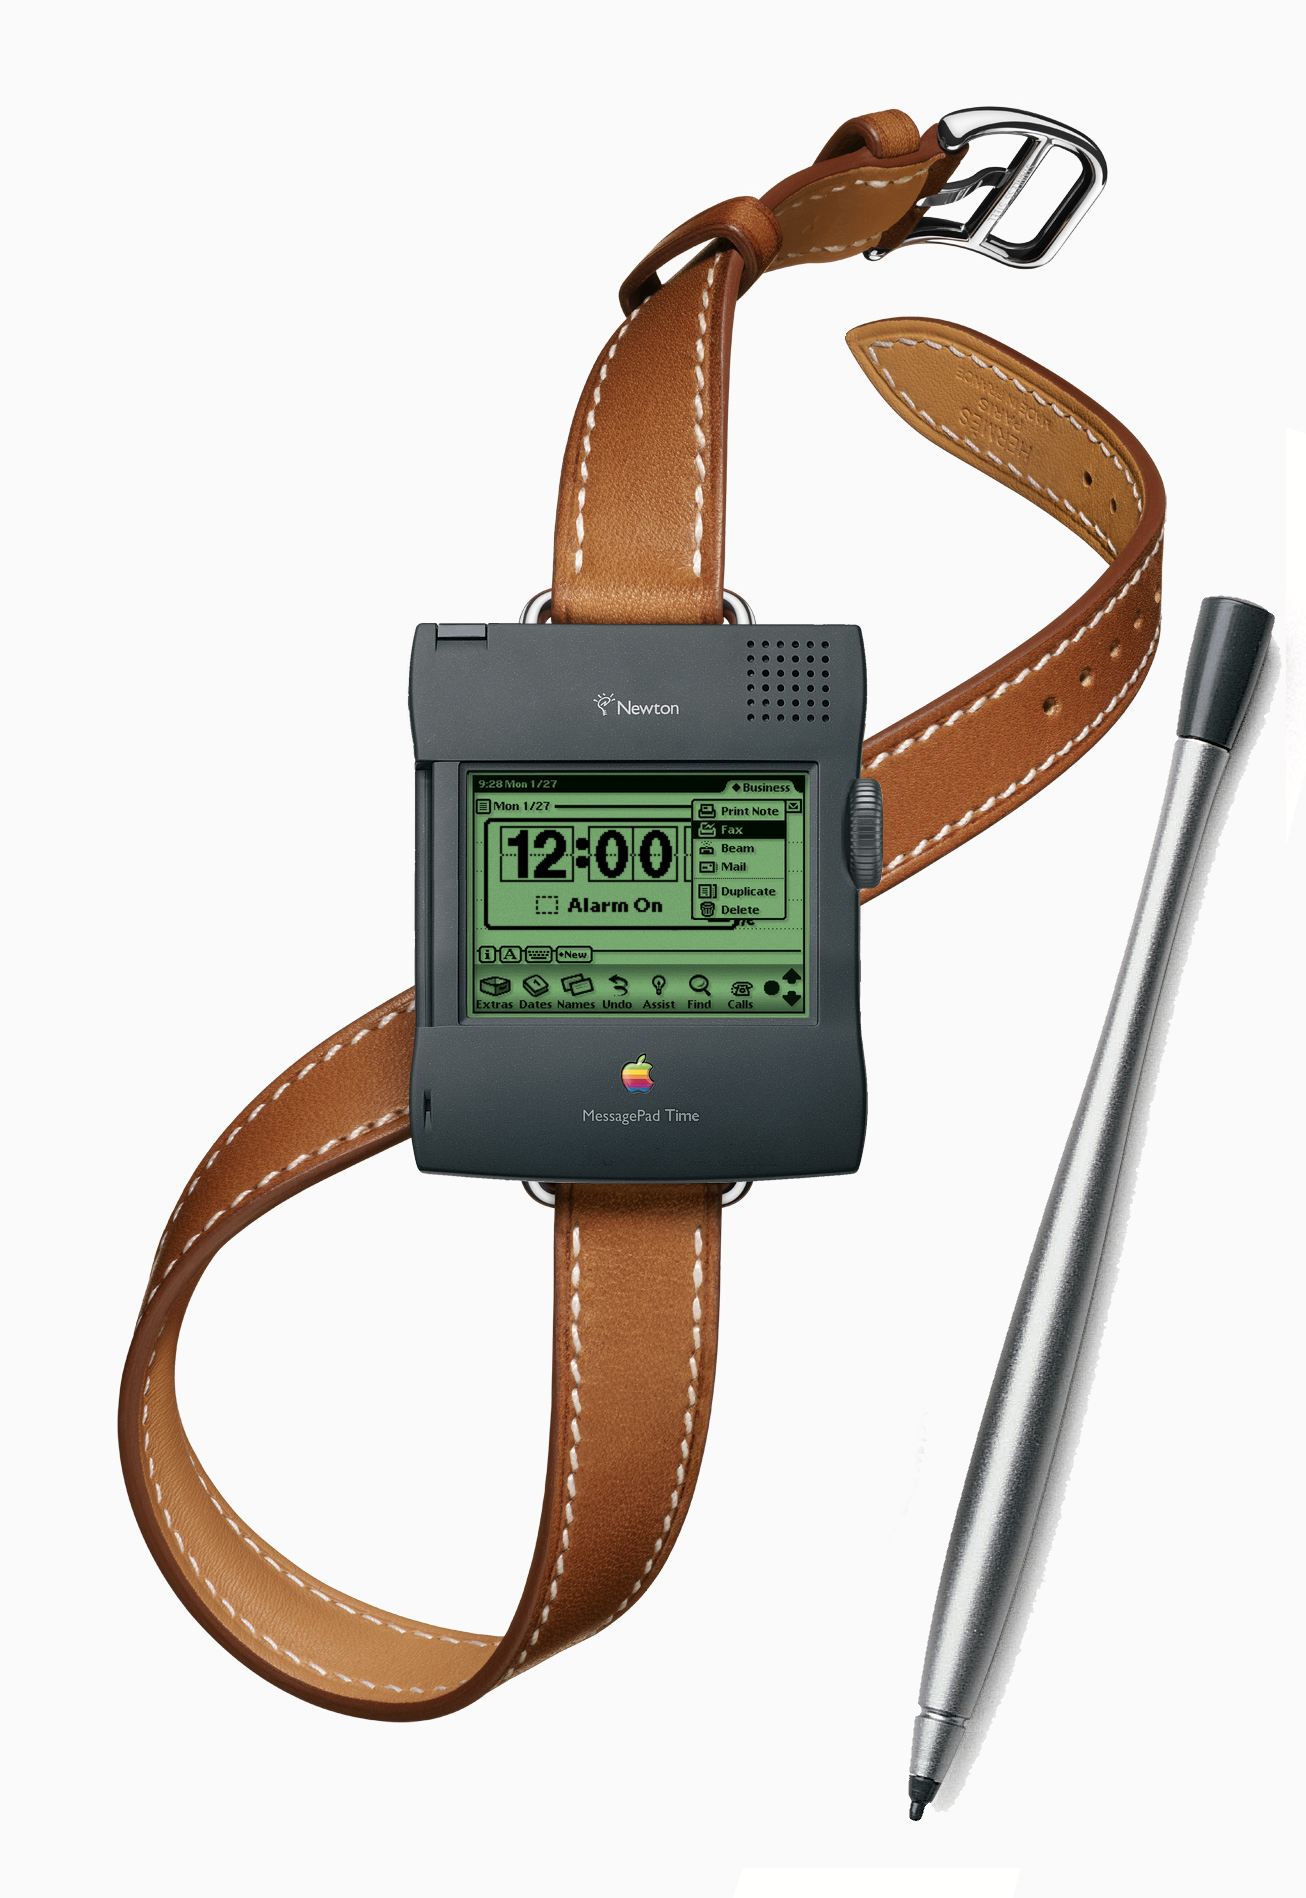 A Apple MessagePad 2000 style wristwatch on a Hermès stainless steel double tour leather watch band. A Newton stylus is in the lower right of the picture. The watch screen shows a 12:00 alarm and a dropdown menu with “Fax” highlighted.